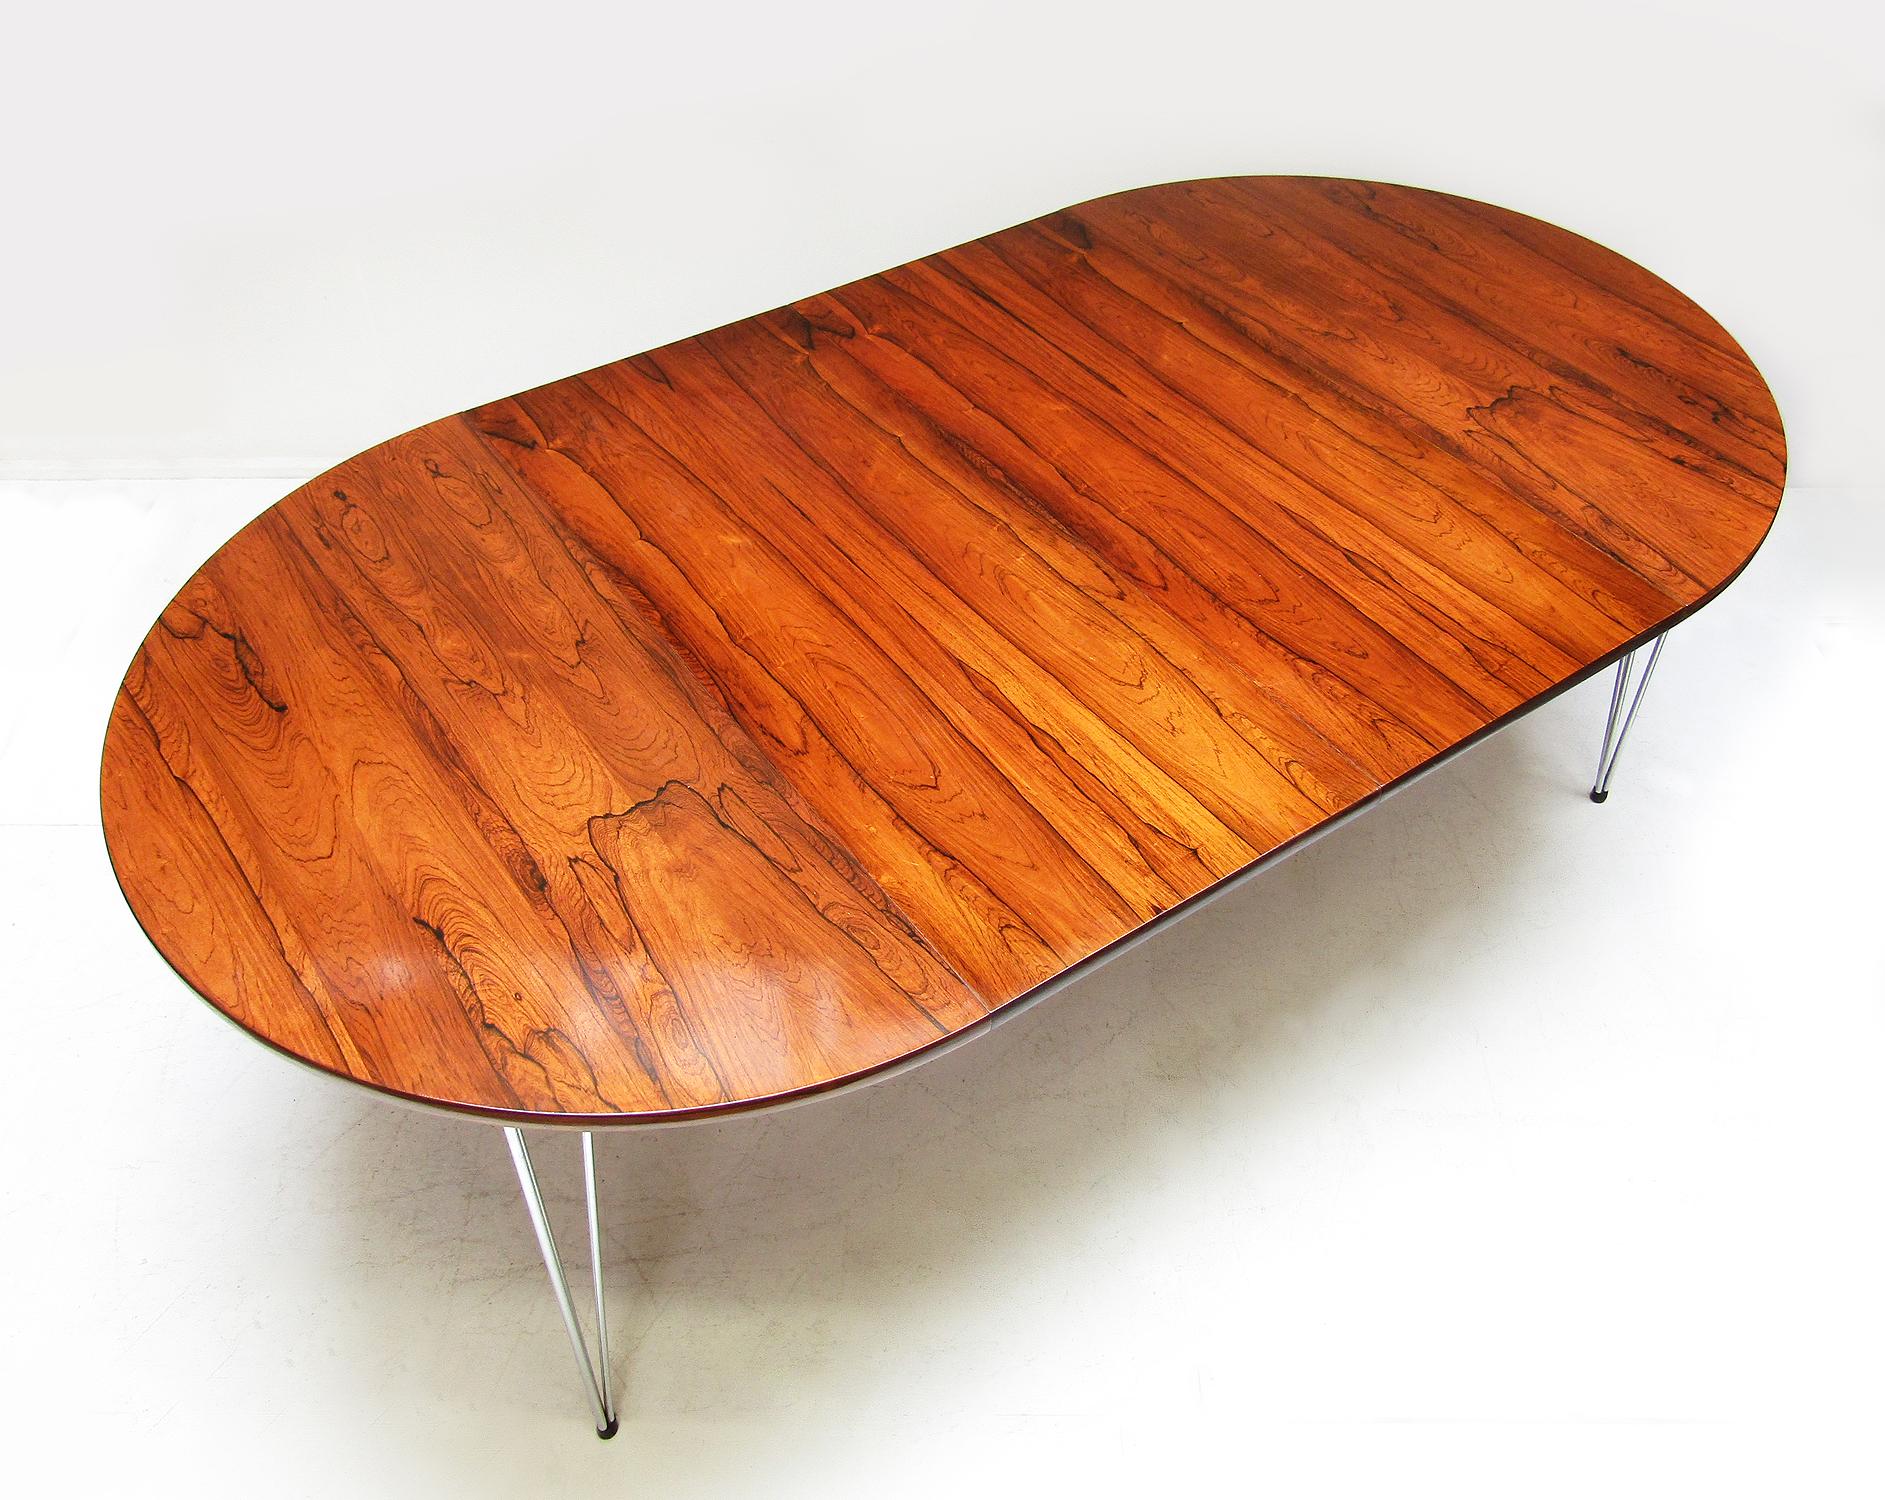 A richly figured extending dining or conference table in Rio rosewood by Hans Brattrud for Hove Mobler.

With two leaves, it can extend from 115cm diameter to an impressive length of 210cm, seating up to 12.
 
In excellent restored condition, it has